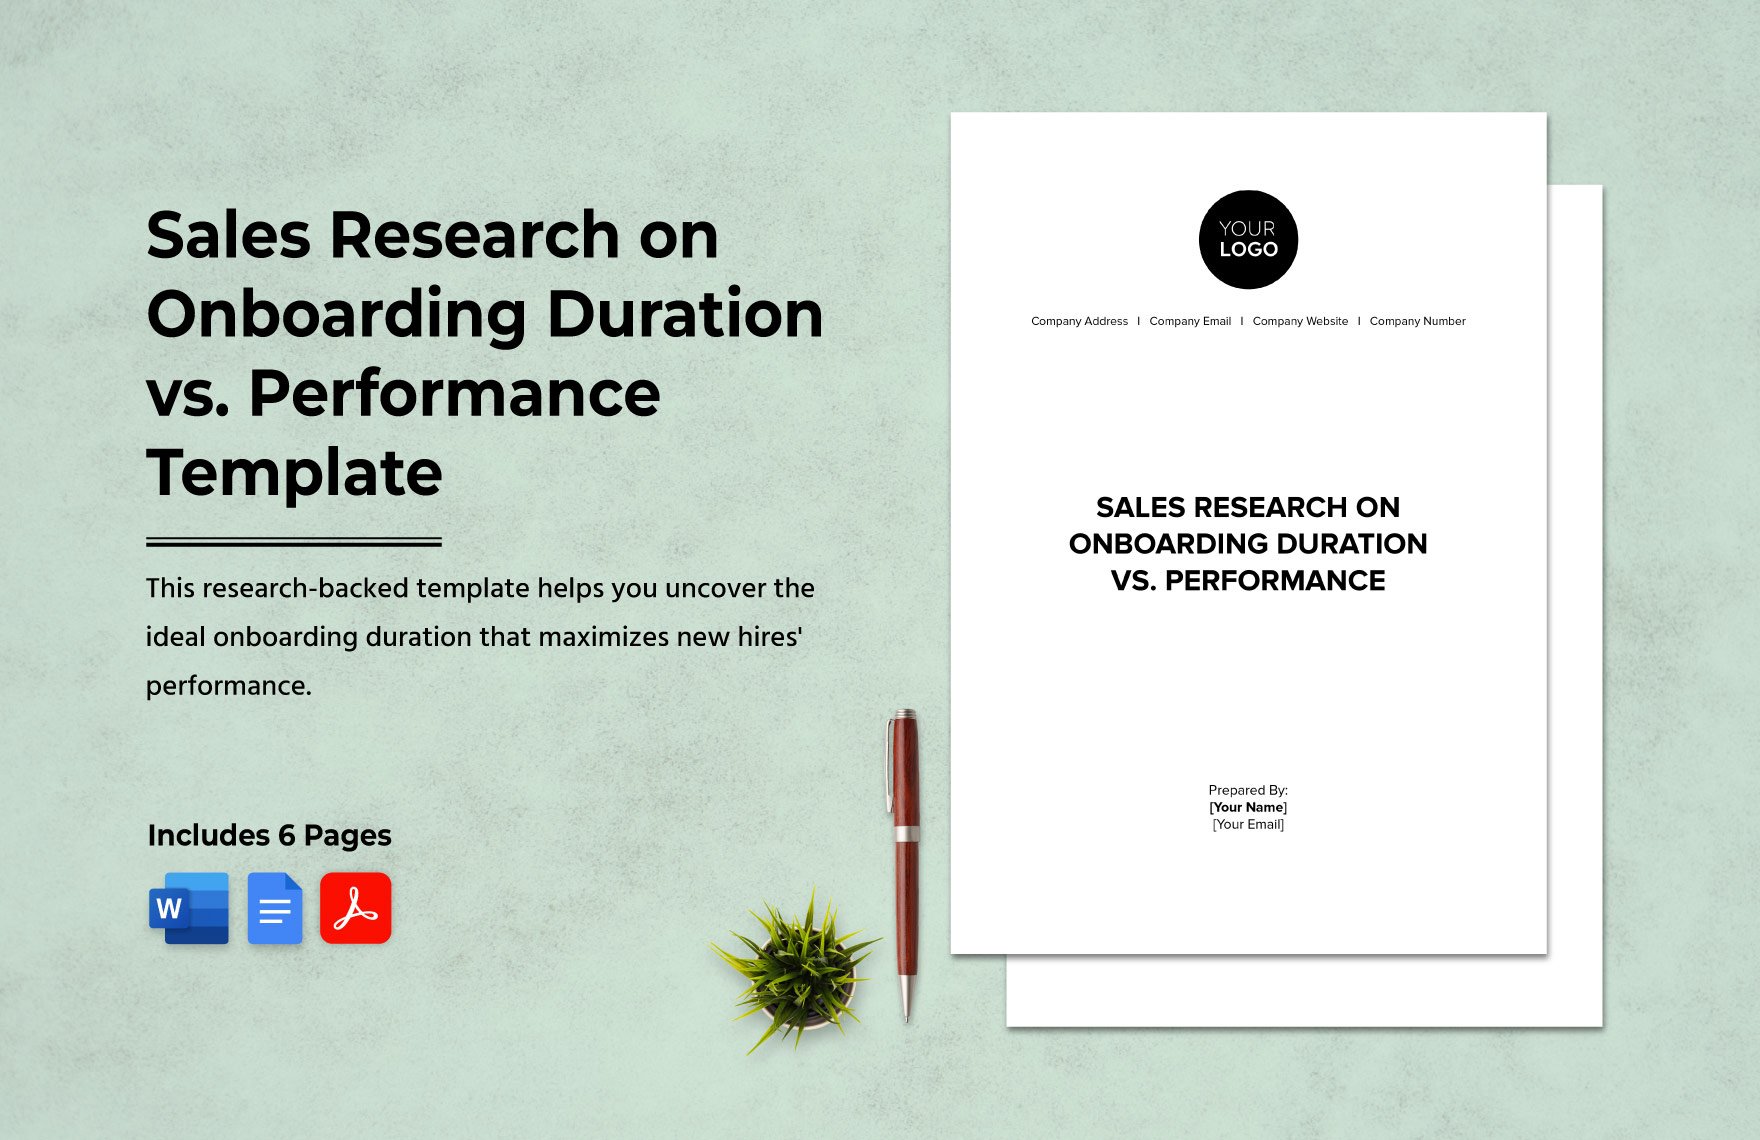 Sales Research on Onboarding Duration vs. Performance Template